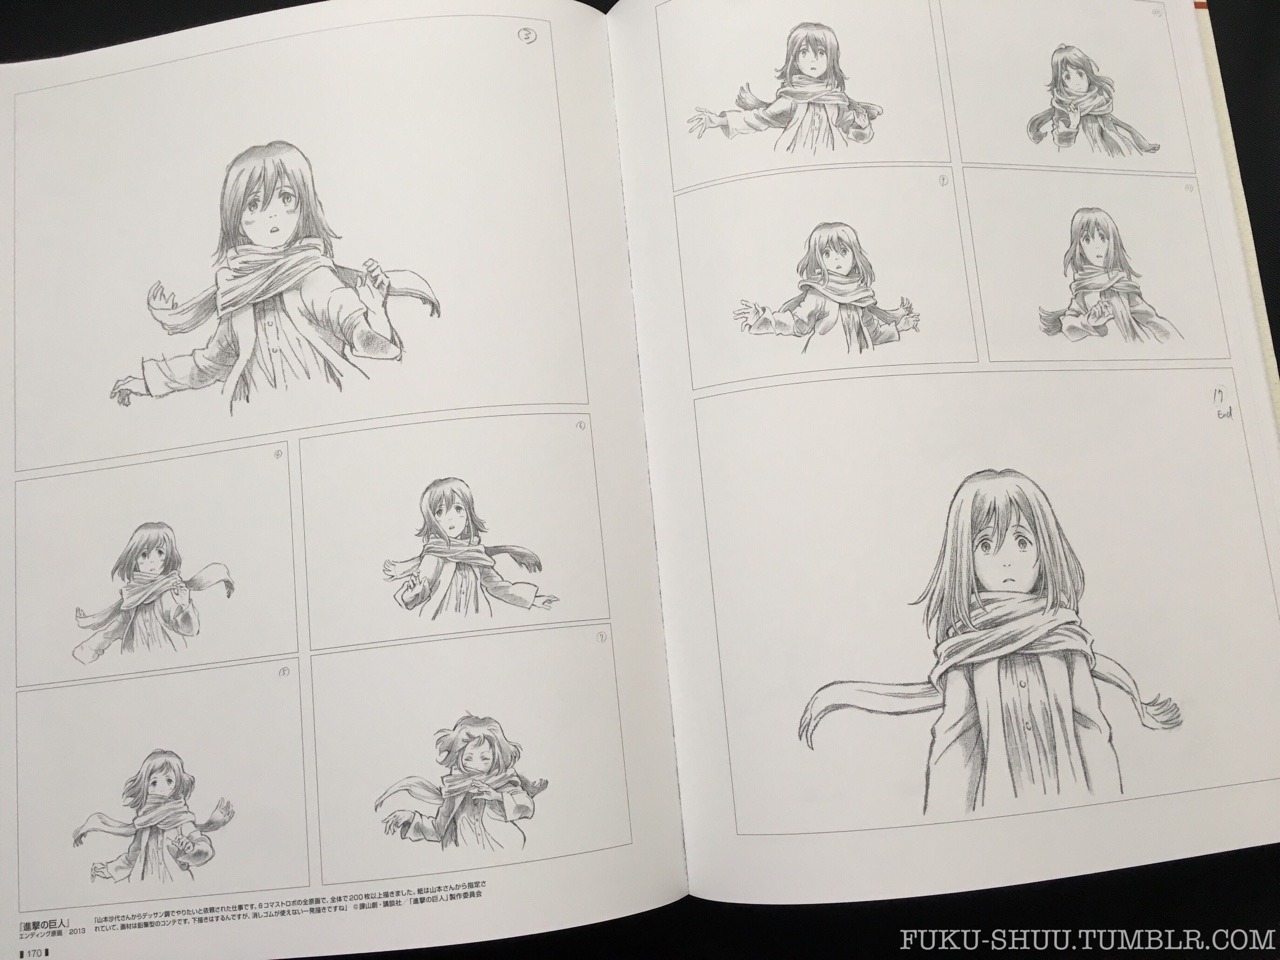 From my copy of The Art of Tadashi Hiramatsu - the renowned animator (Also critical